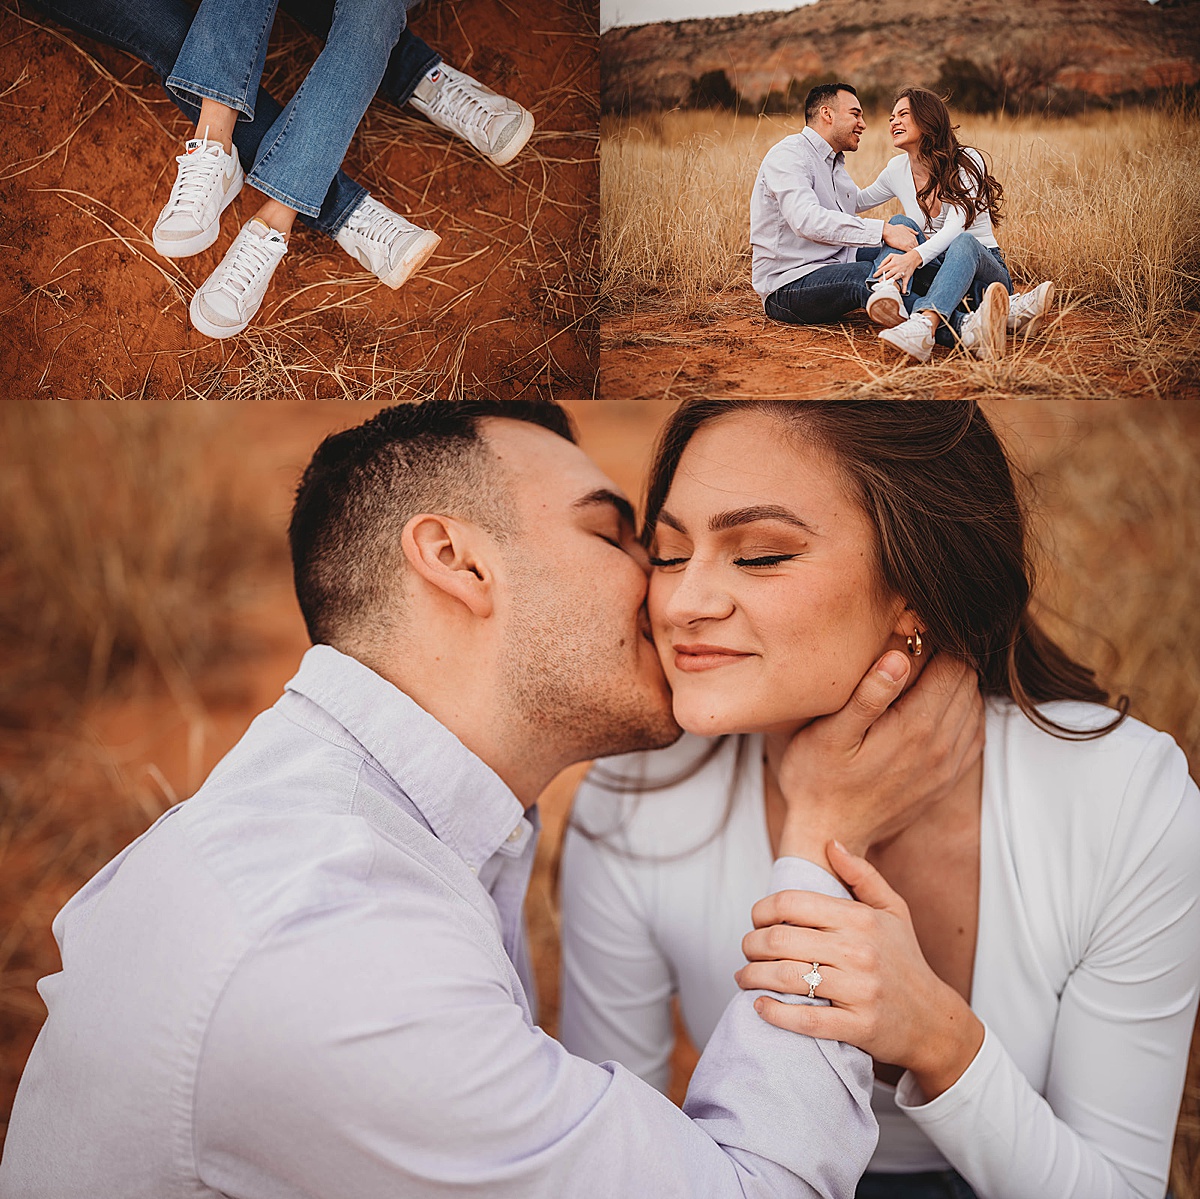 couple in jeans and sneakers show off diamond ring during canyon adventure engagement shoot